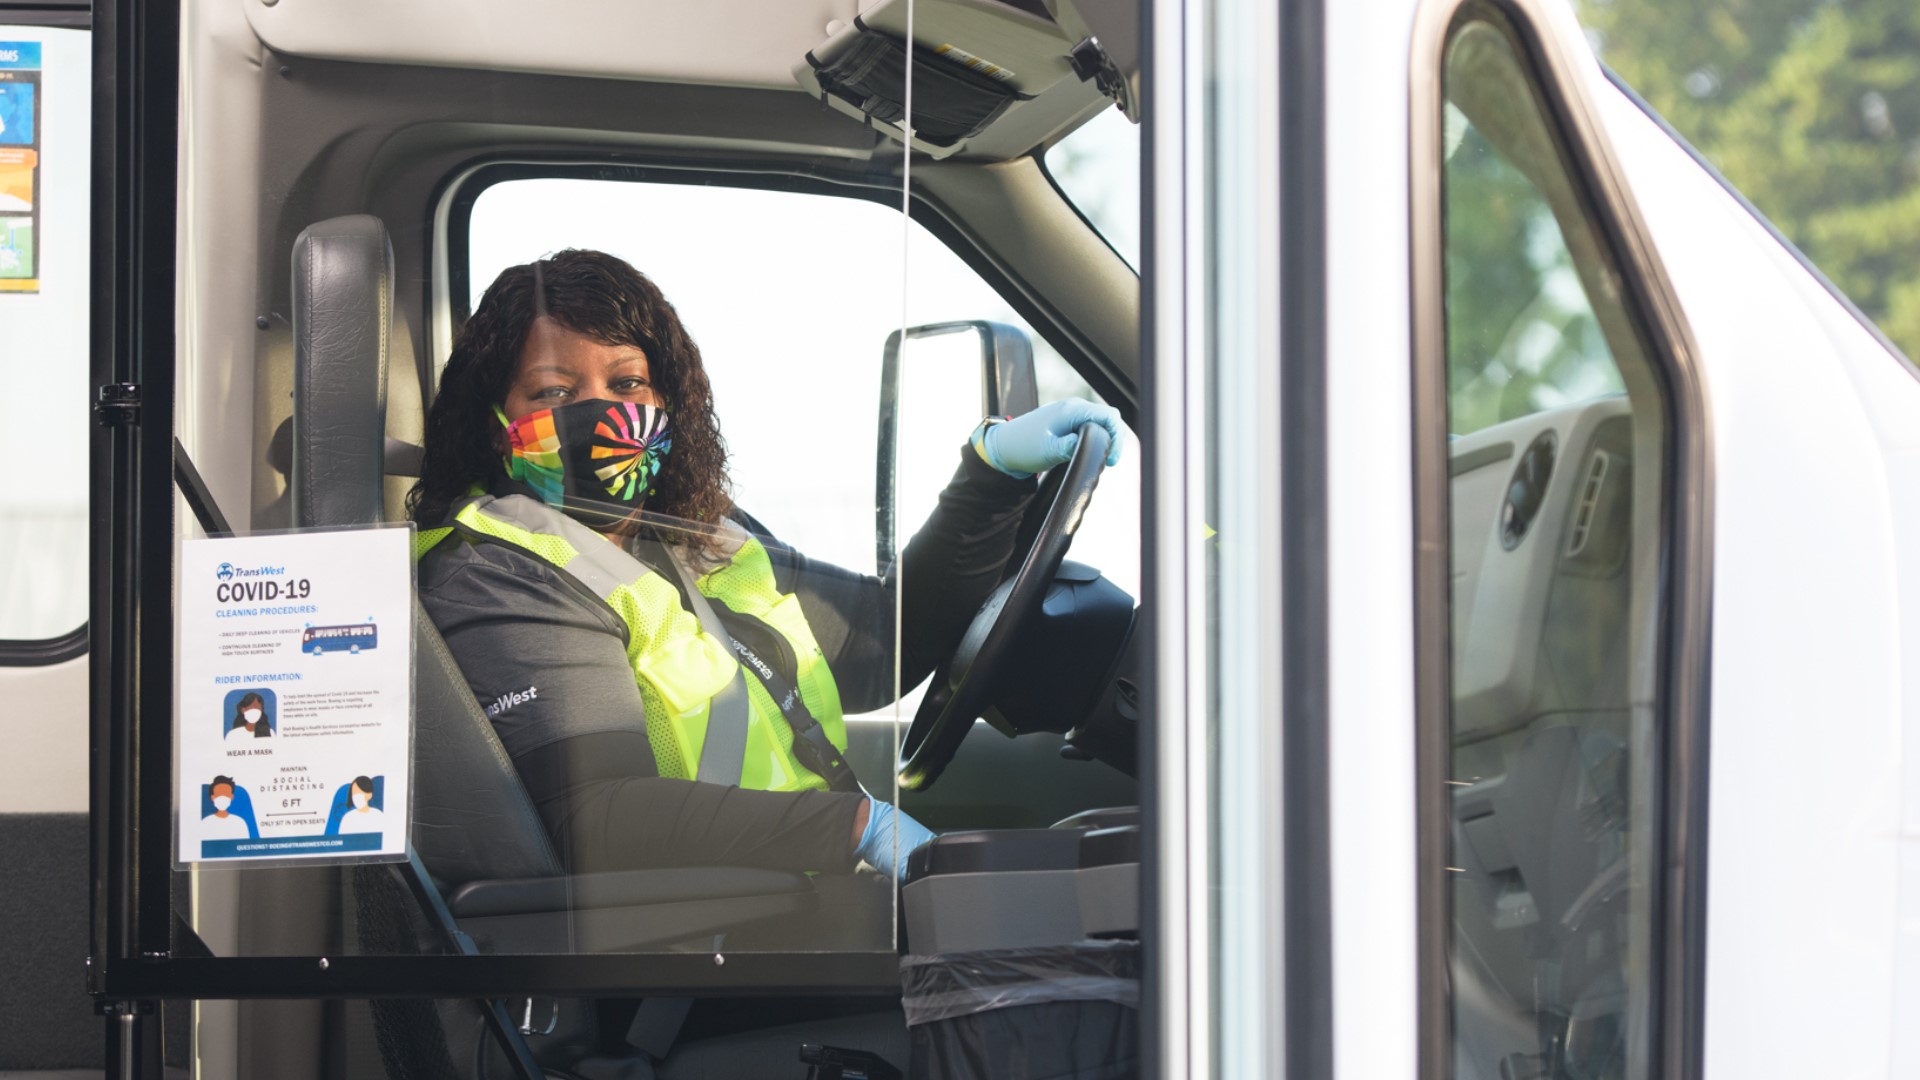 $5k signing bonuses available for CDL drivers as business begins to rebound. Sponsored by TransWest